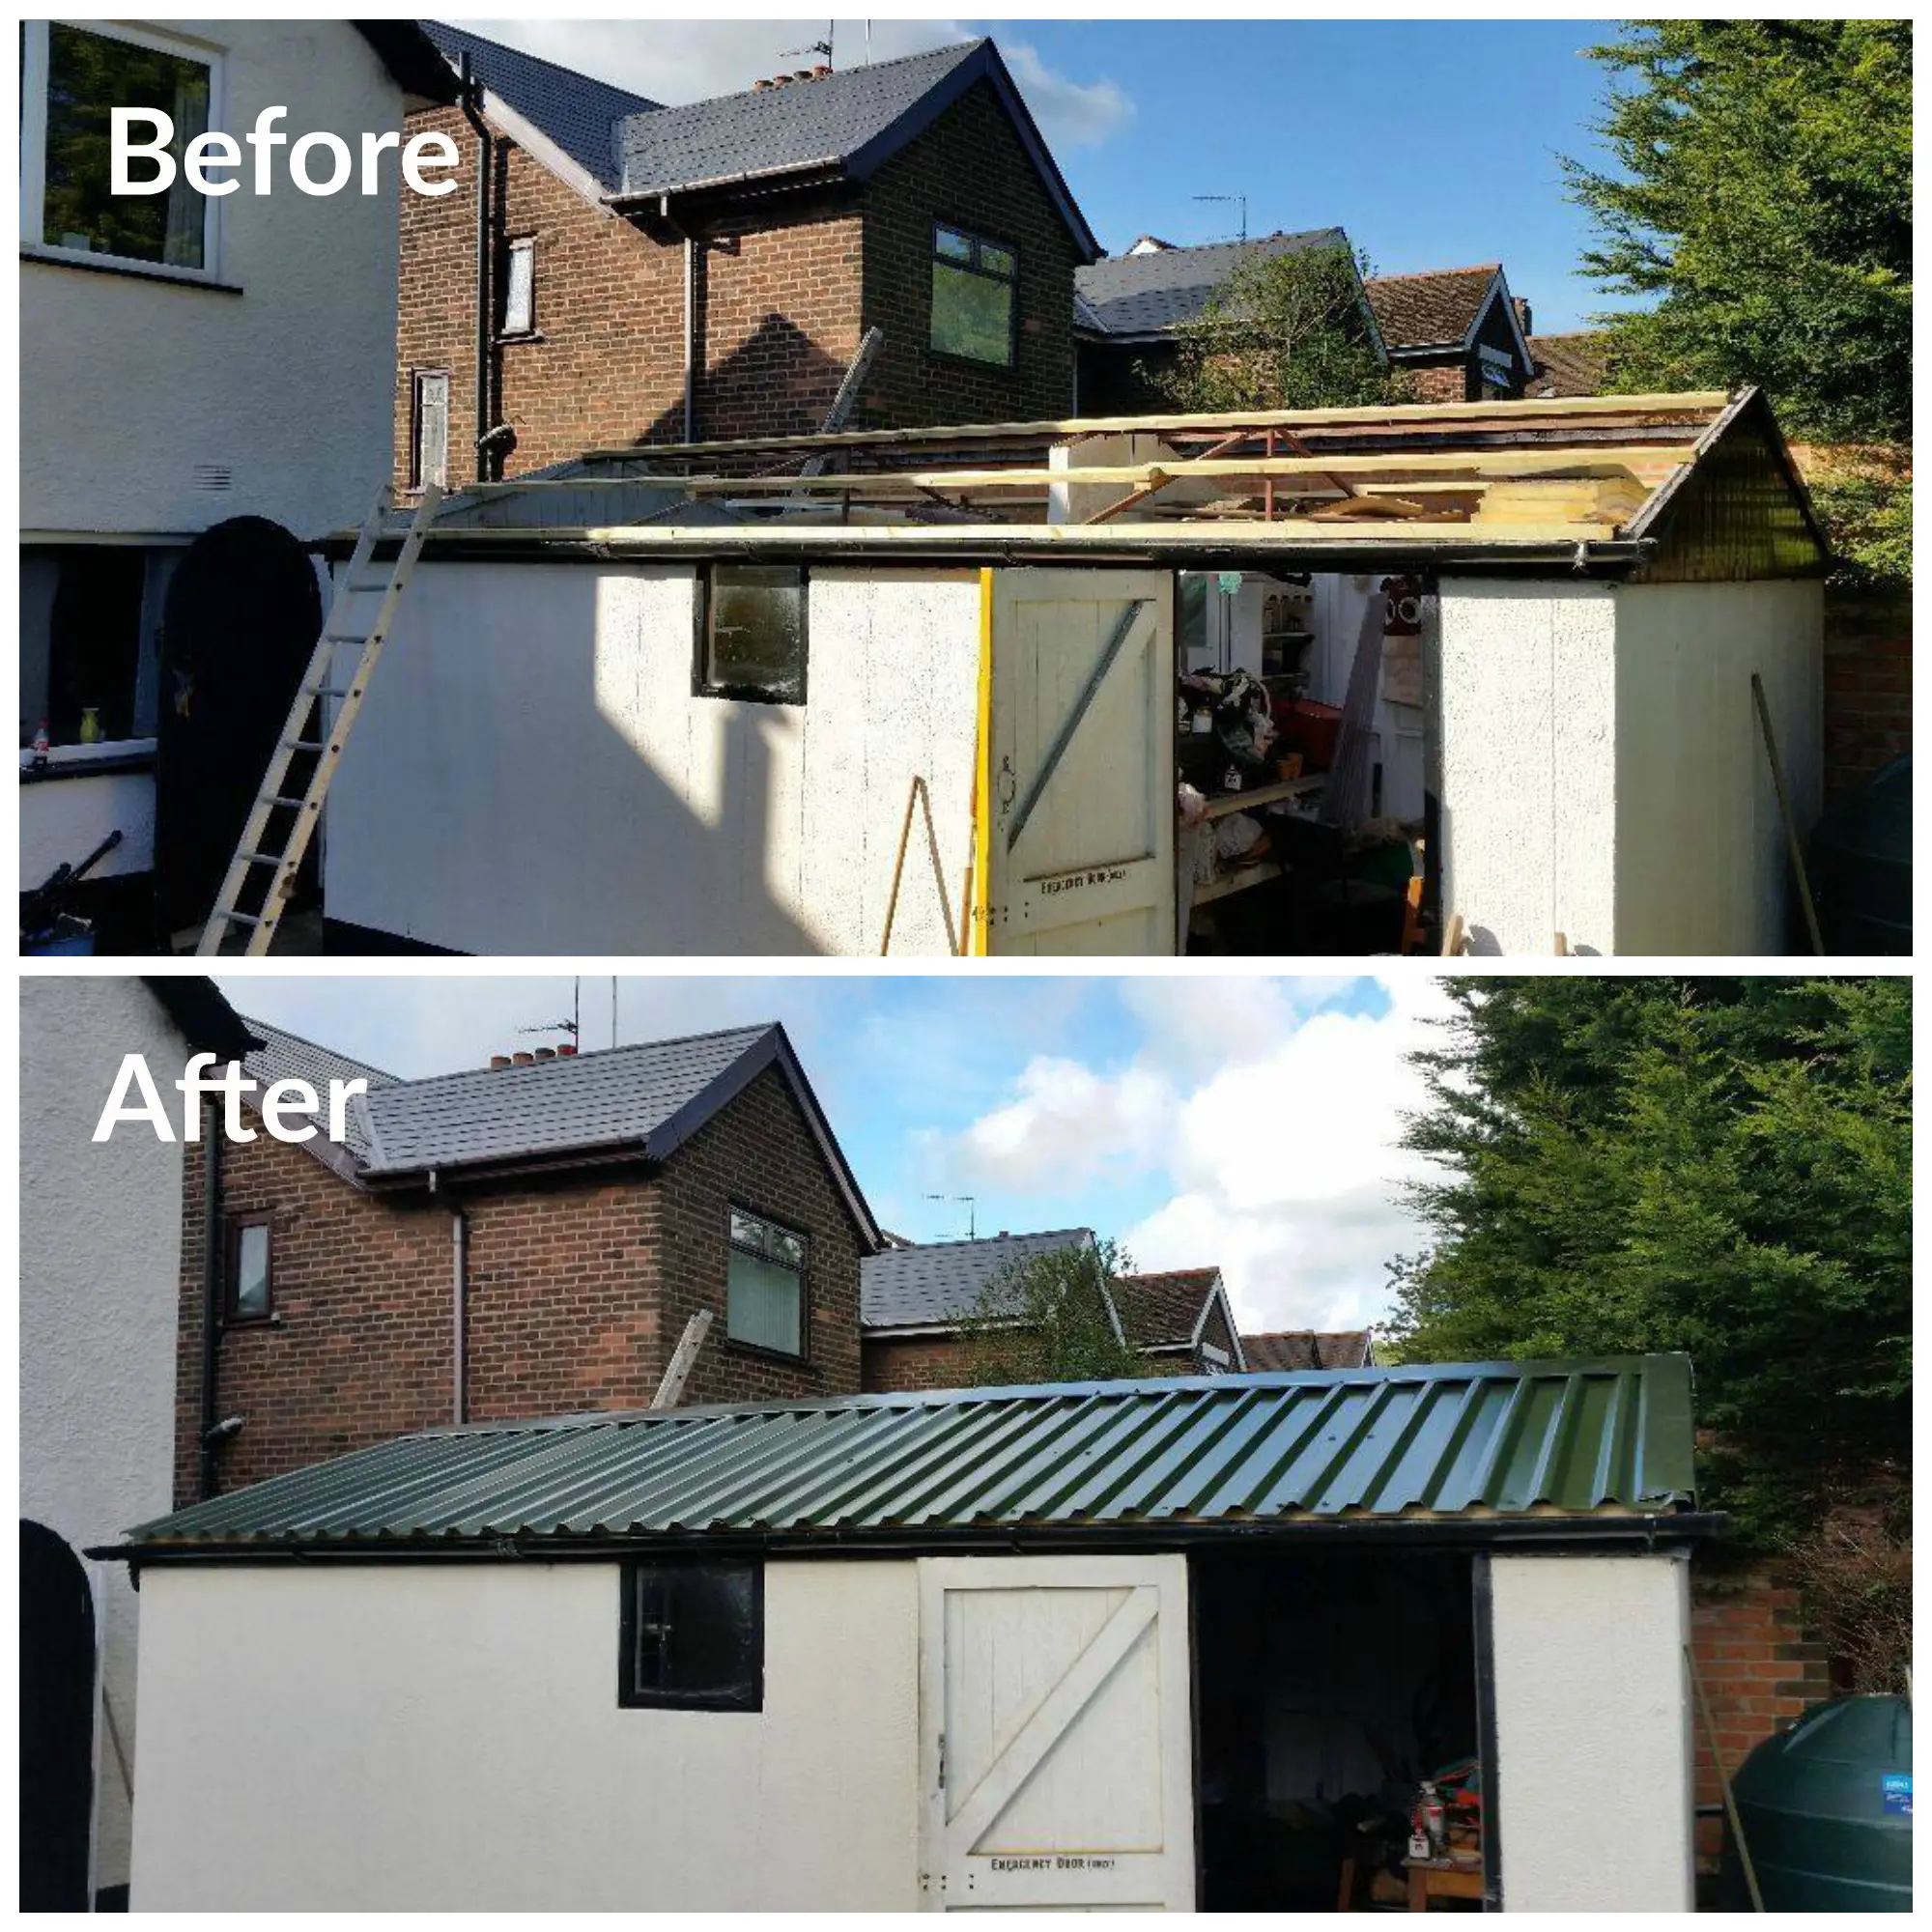 Shed roof before and after